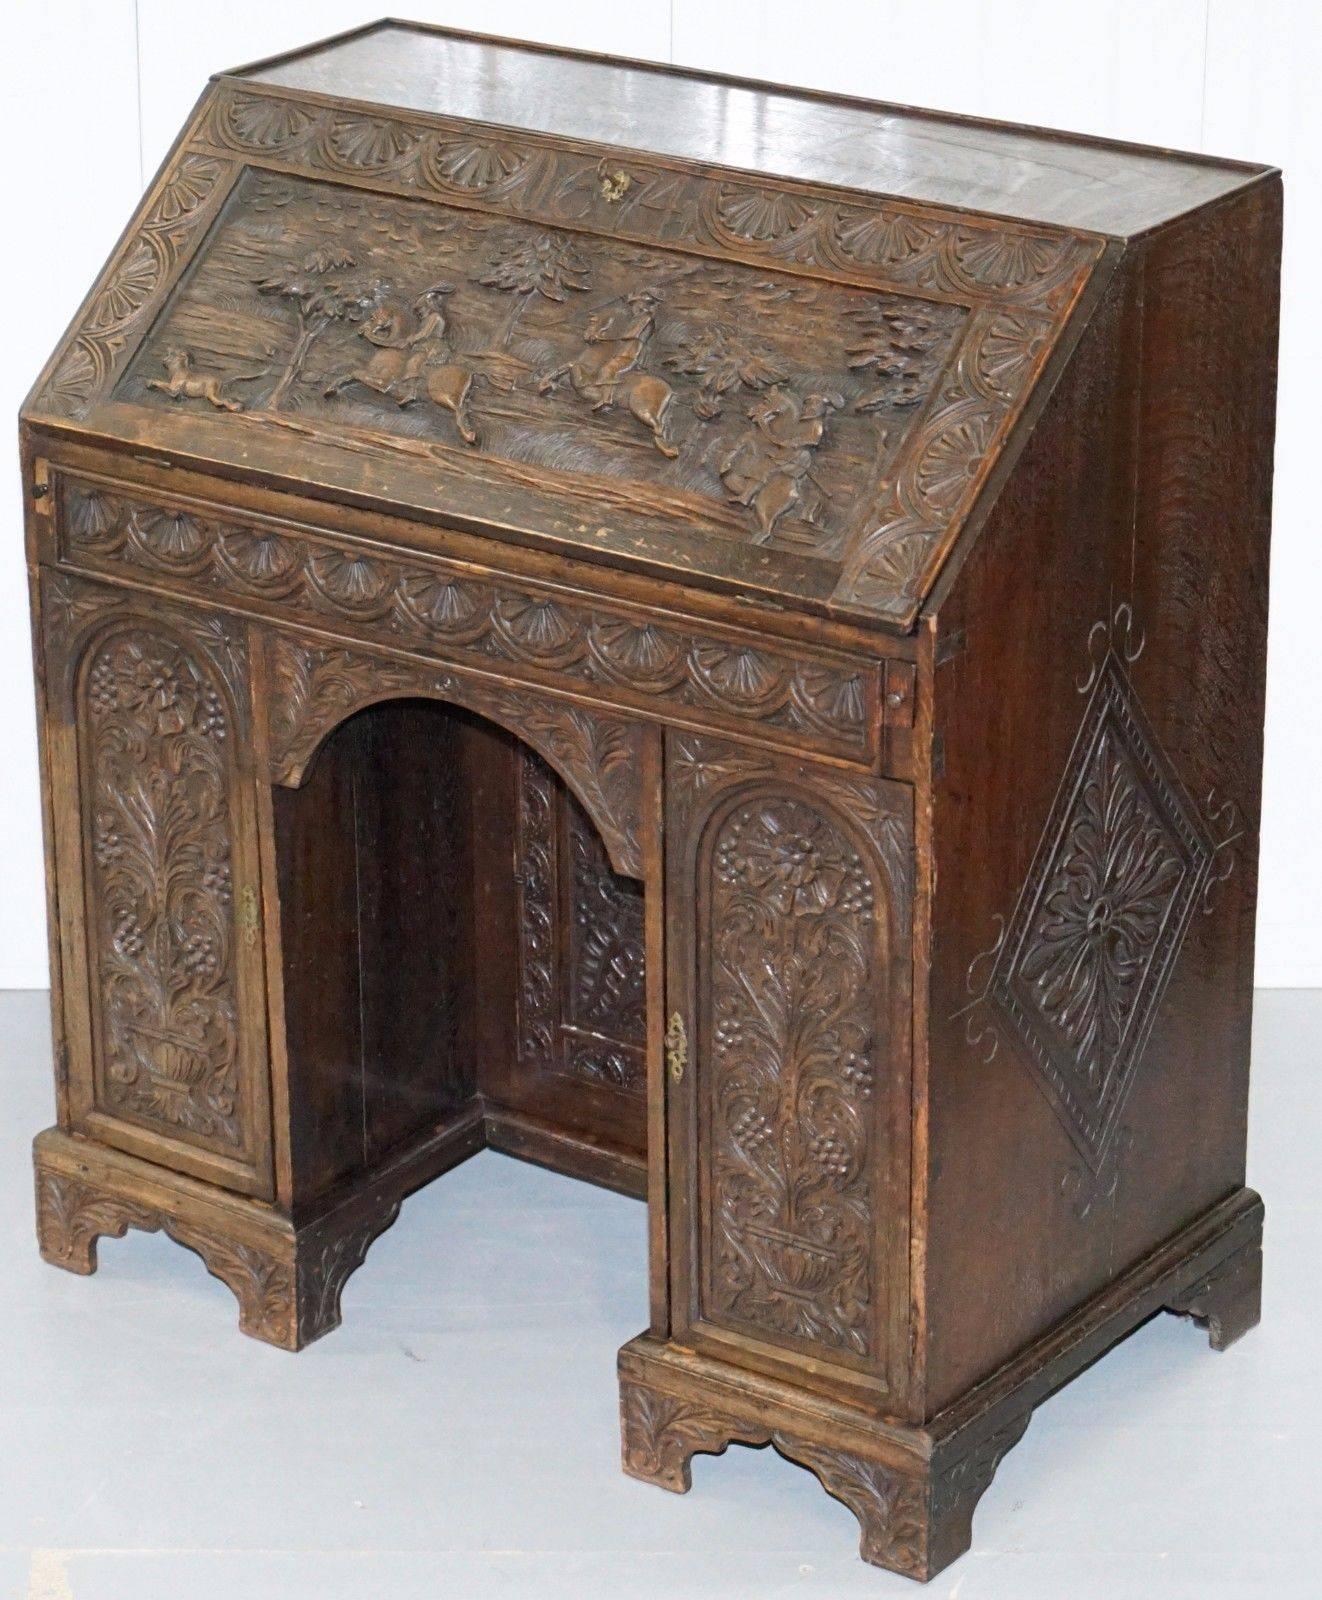 Jacobean Rare Charles II 1674 Carved with Hunting Scenes Writing Bureau Desk Lots Drawers